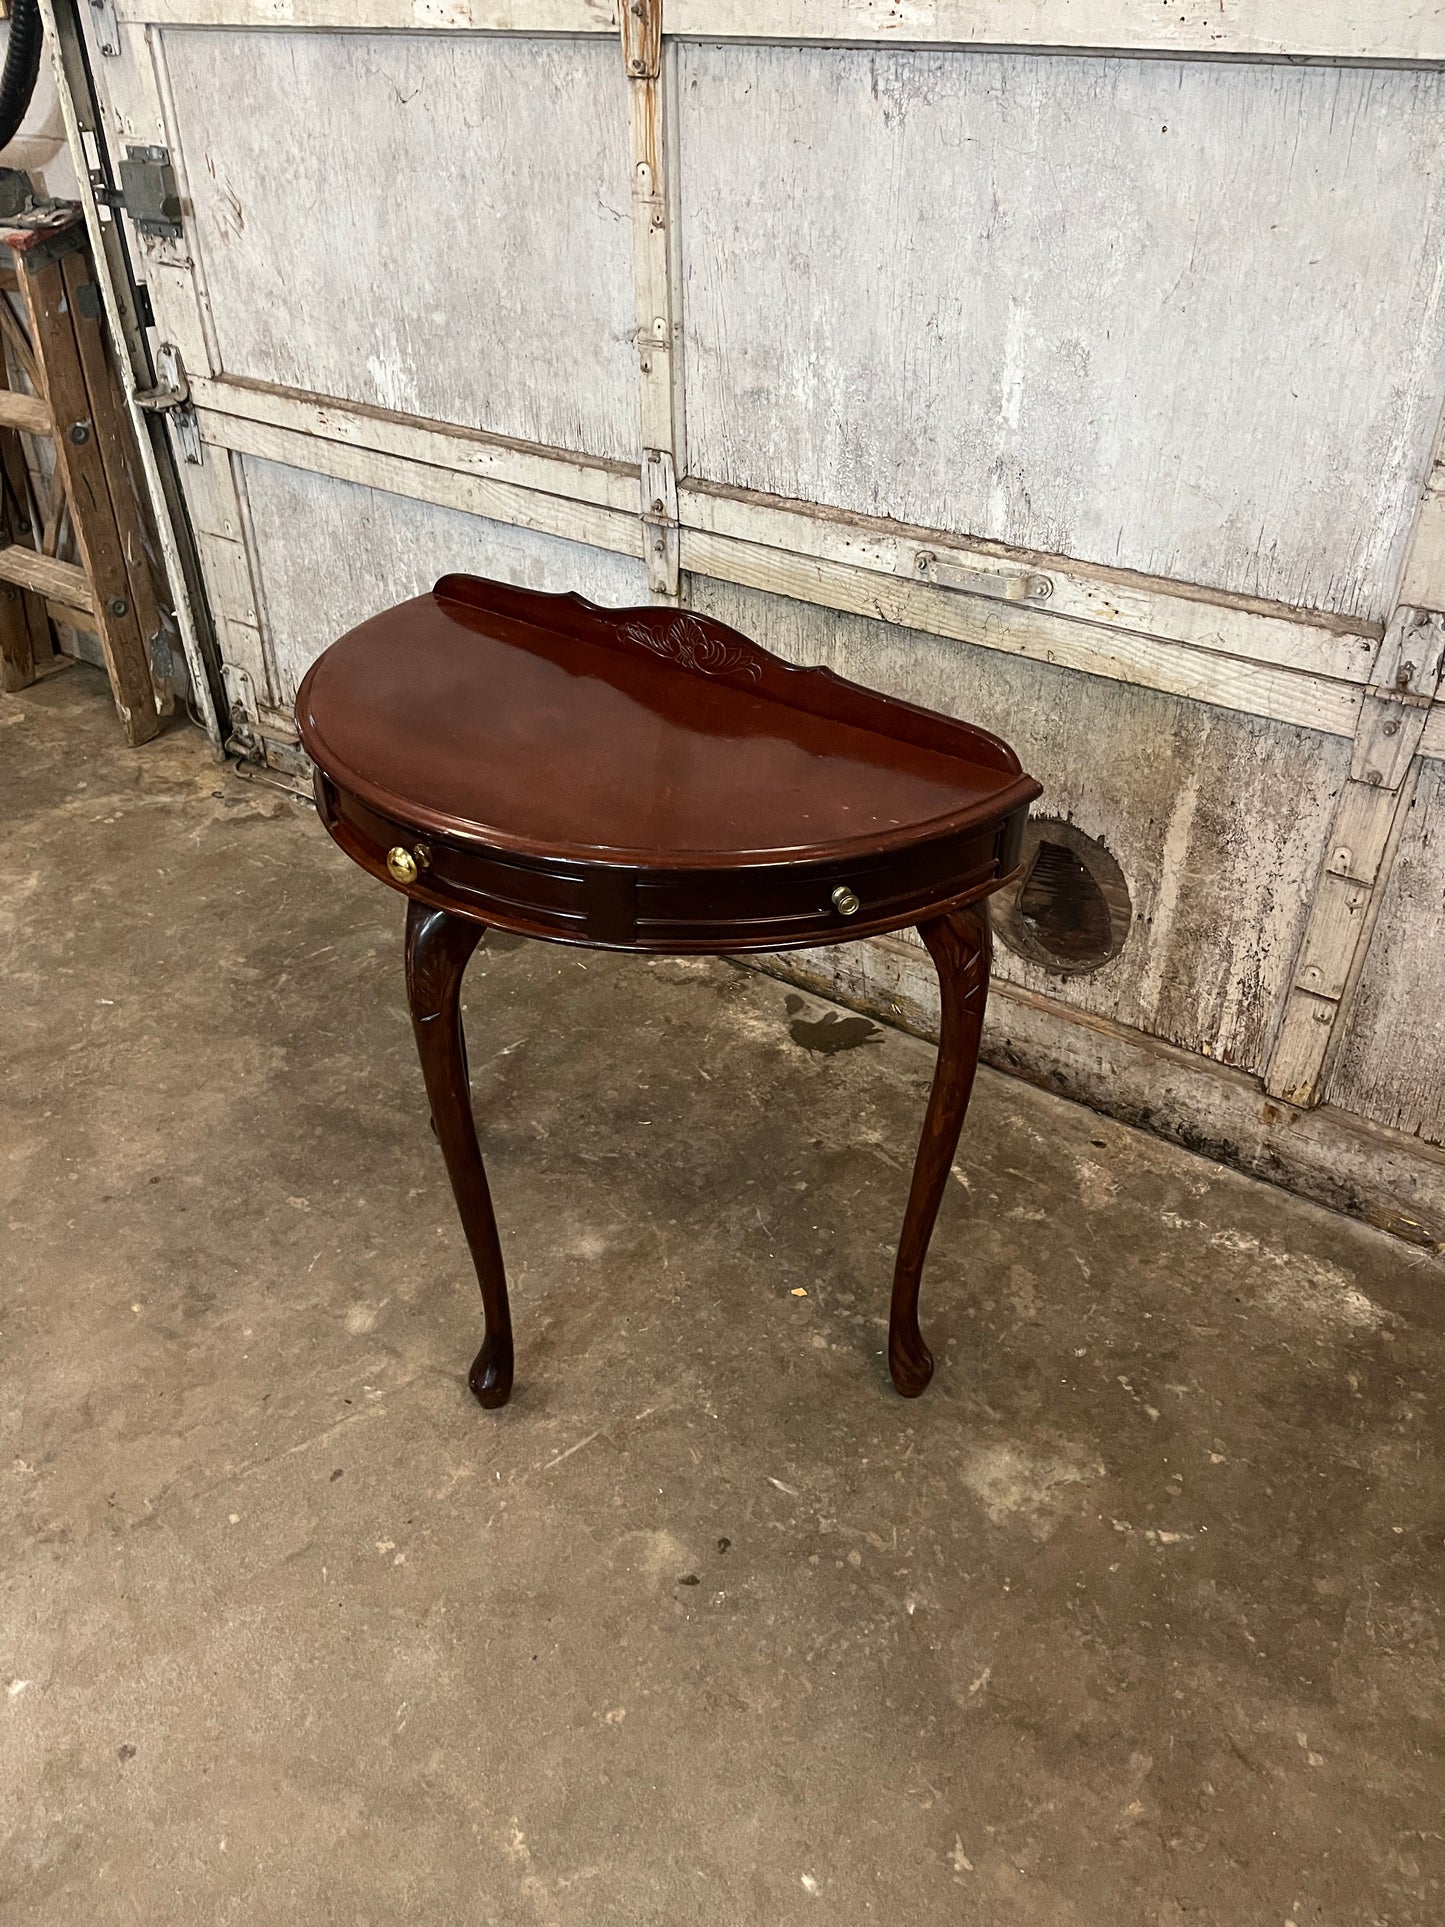 Small Half-Round Clawfoot Table